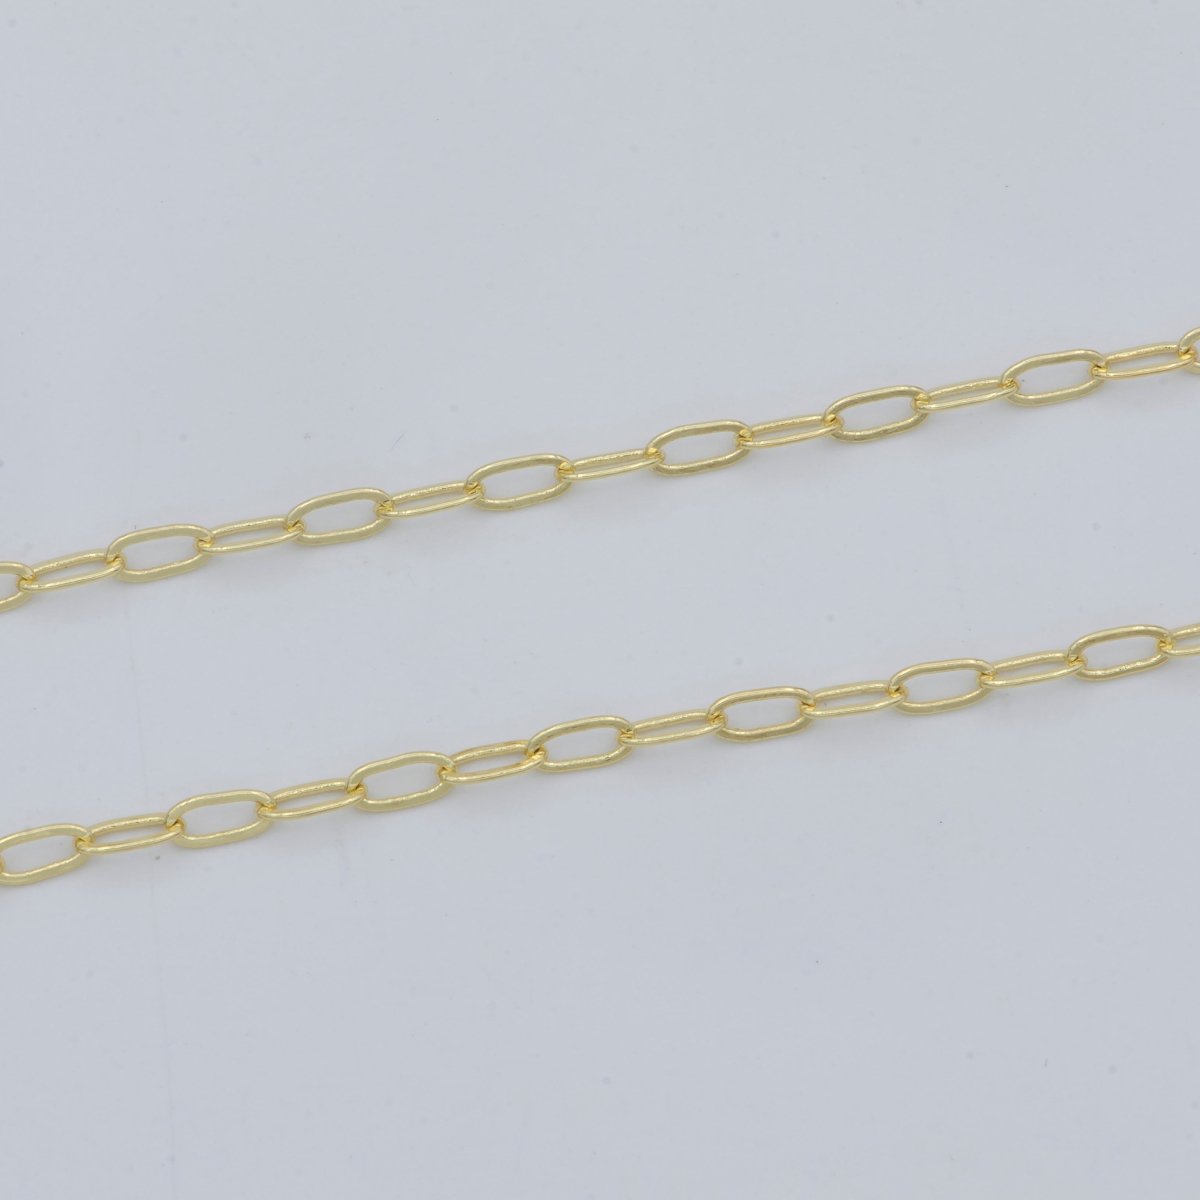 24K Gold Filled Dainty Oval Rolo Gold Chain by Yard, Oval Link, Wholesale bulk Roll Chain for Jewelry Making, Width 2.4mm | ROLL-471 Clearance Pricing - DLUXCA